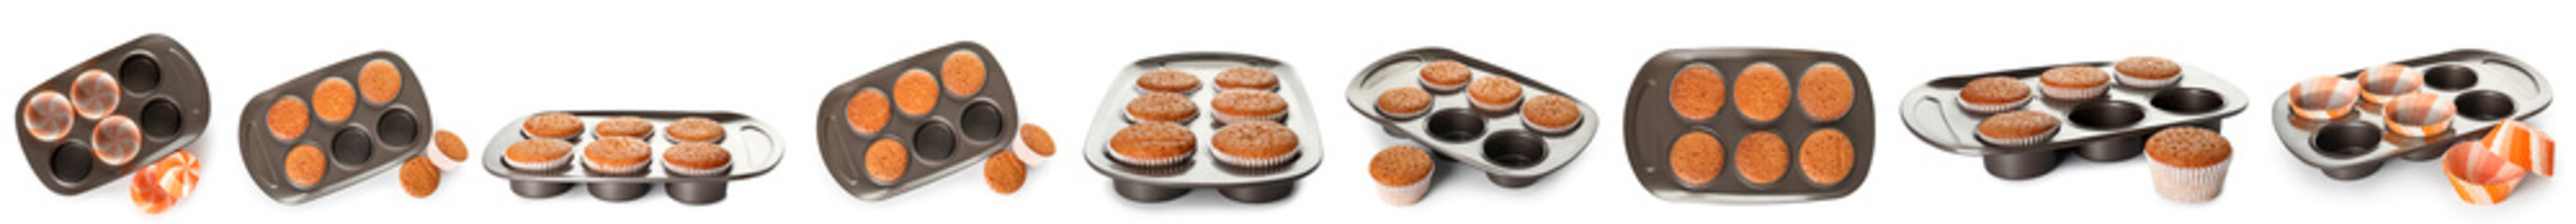 Collage of baking tray with muffins on white background